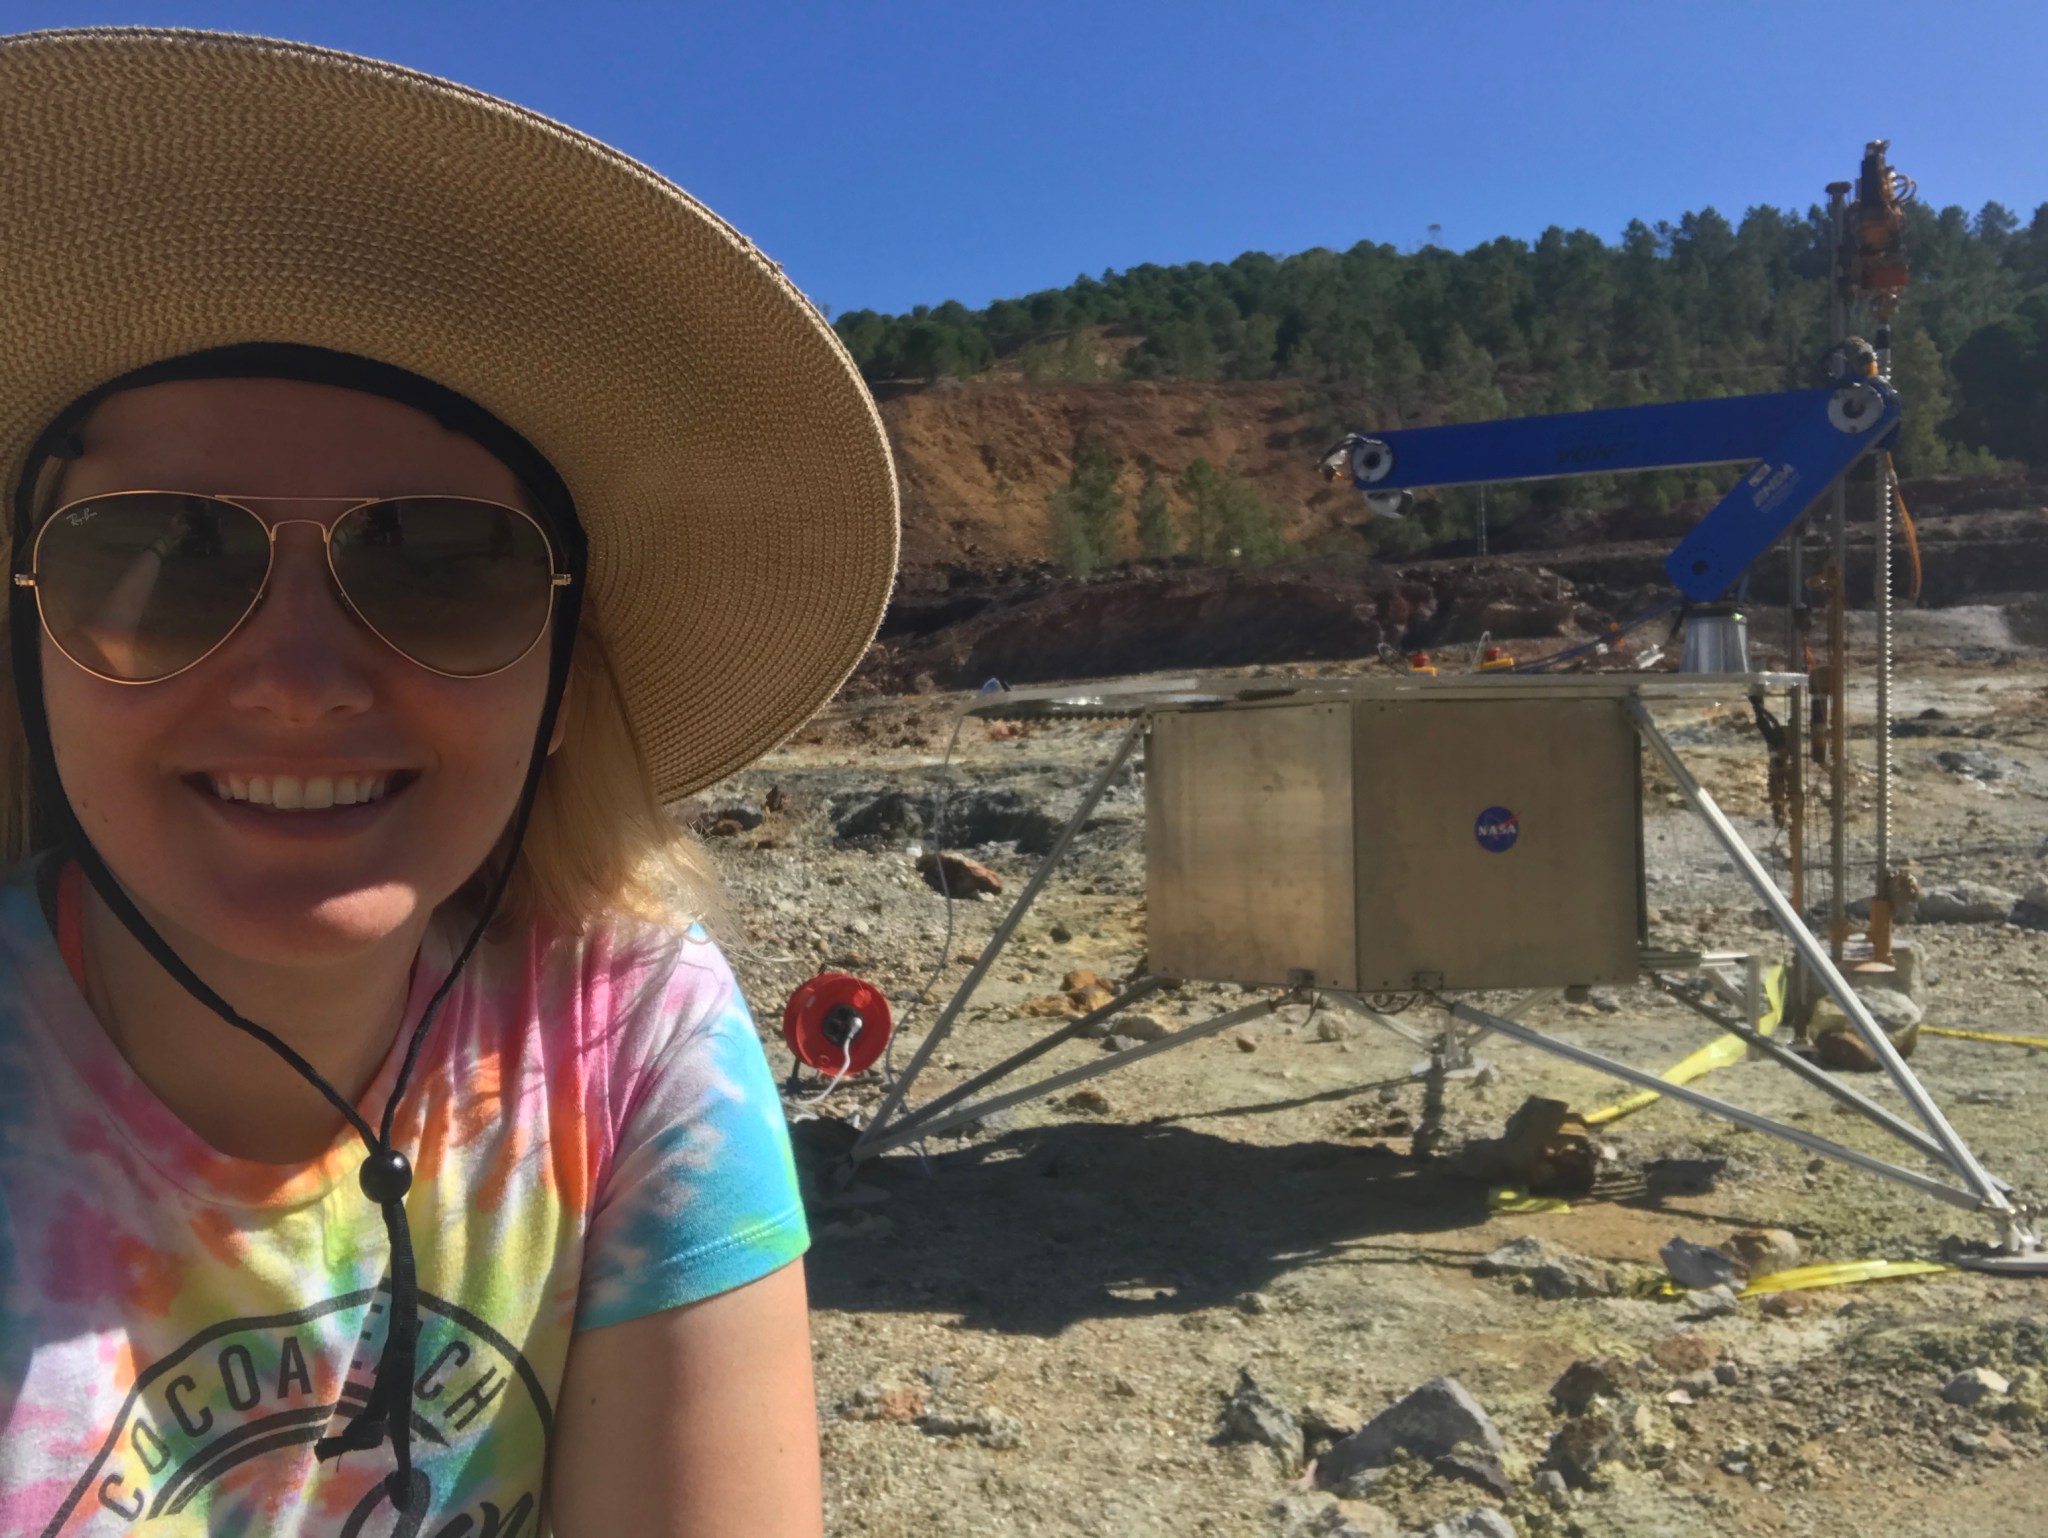 Deniz Burnham at a field test of drilling and sampling prototype instruments, as part of the Life-detection Mars Analog Project’s deployment at the Rio Tinto, Spain, Mars-analog site in the summer of 2017.